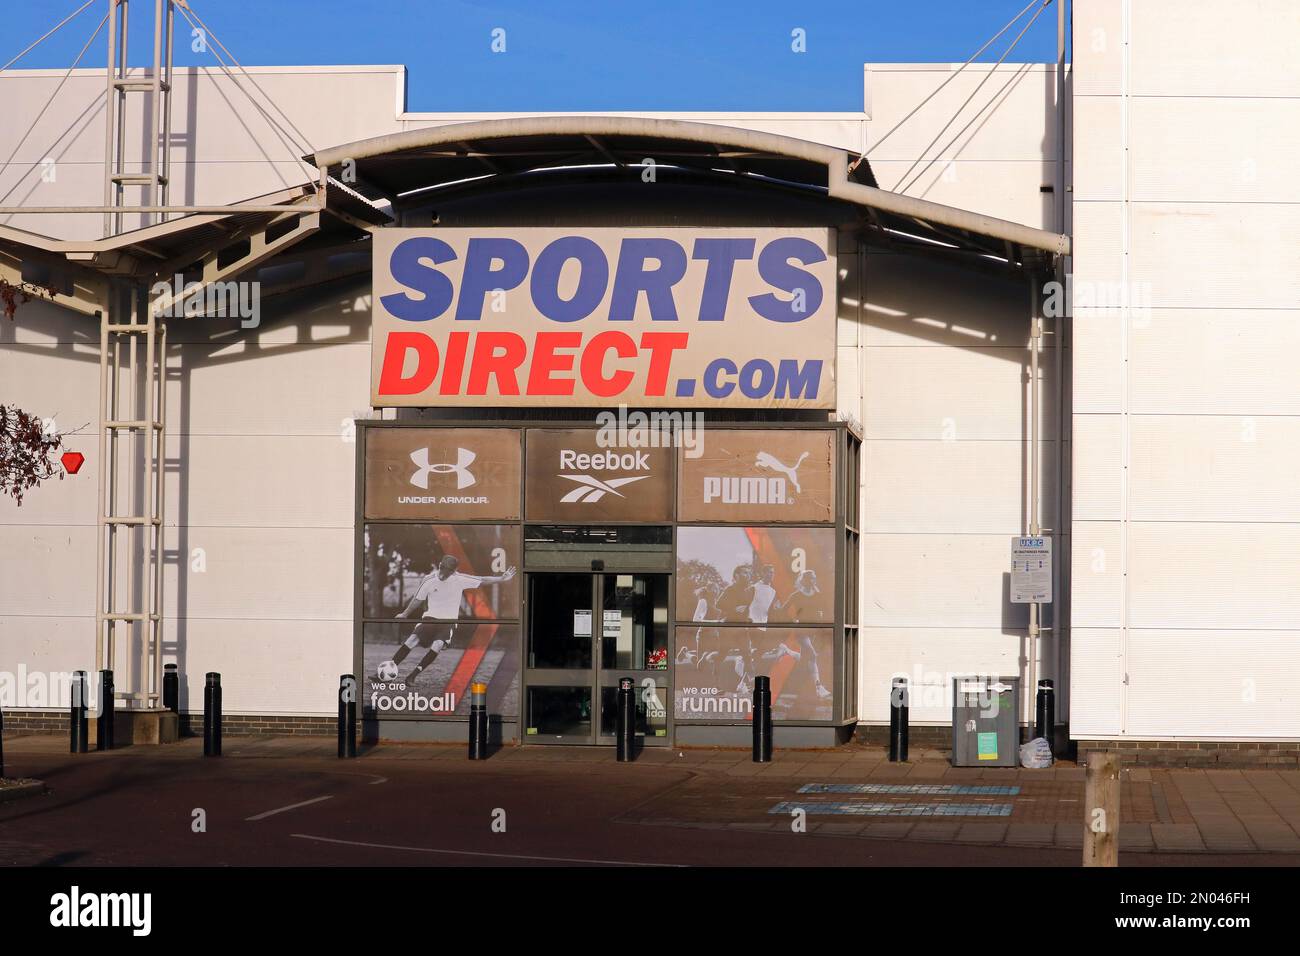 Sports direct shop or store in Kempston, Bedfordshire, United Kingdom. A British retail sports group owned by Department store chain House of Fraser. Stock Photo